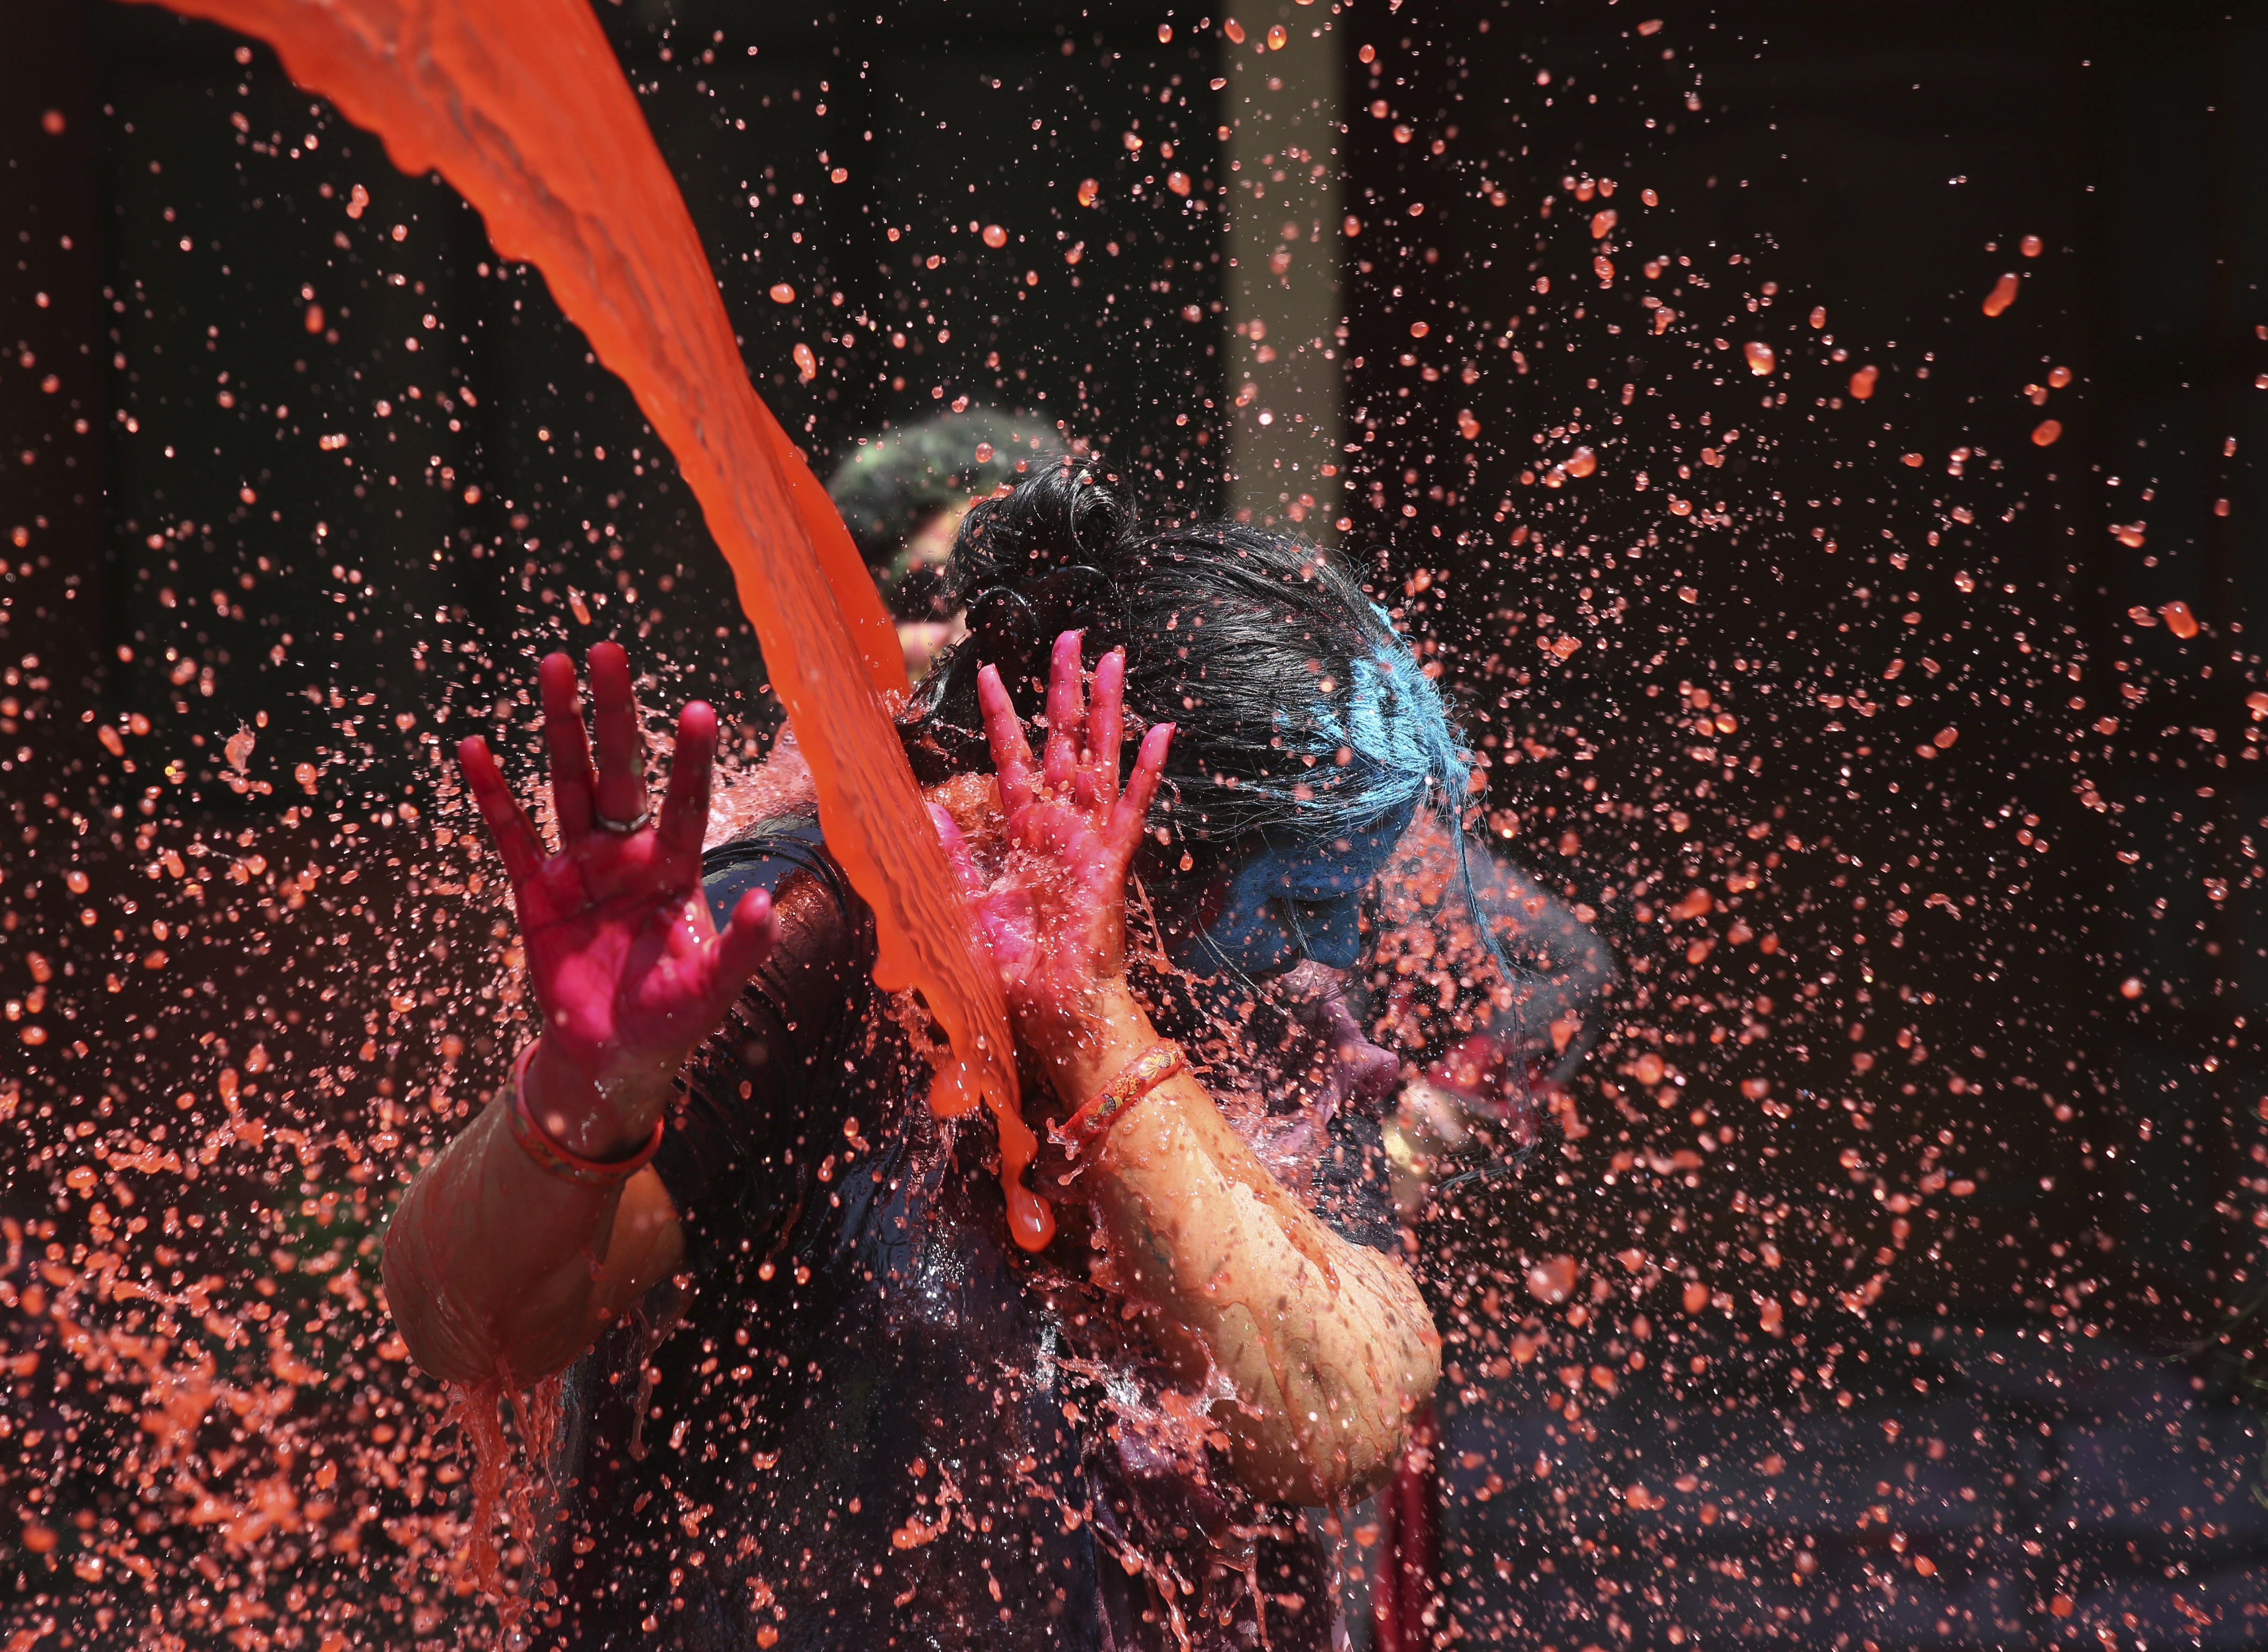 Colored water is splashed on a woman during Holi festivities in Allahabad, India, Thursday, March 21, 2019. This exuberant festival originally held to celebrate the fertility of the land, is also associated with the immortal love of Hindu God Krishna and Radha. Holi celebration is an excuse for Indians to shed inhibitions for a day of spring fever and big fun. (AP Photo/Rajesh Kumar Singh)